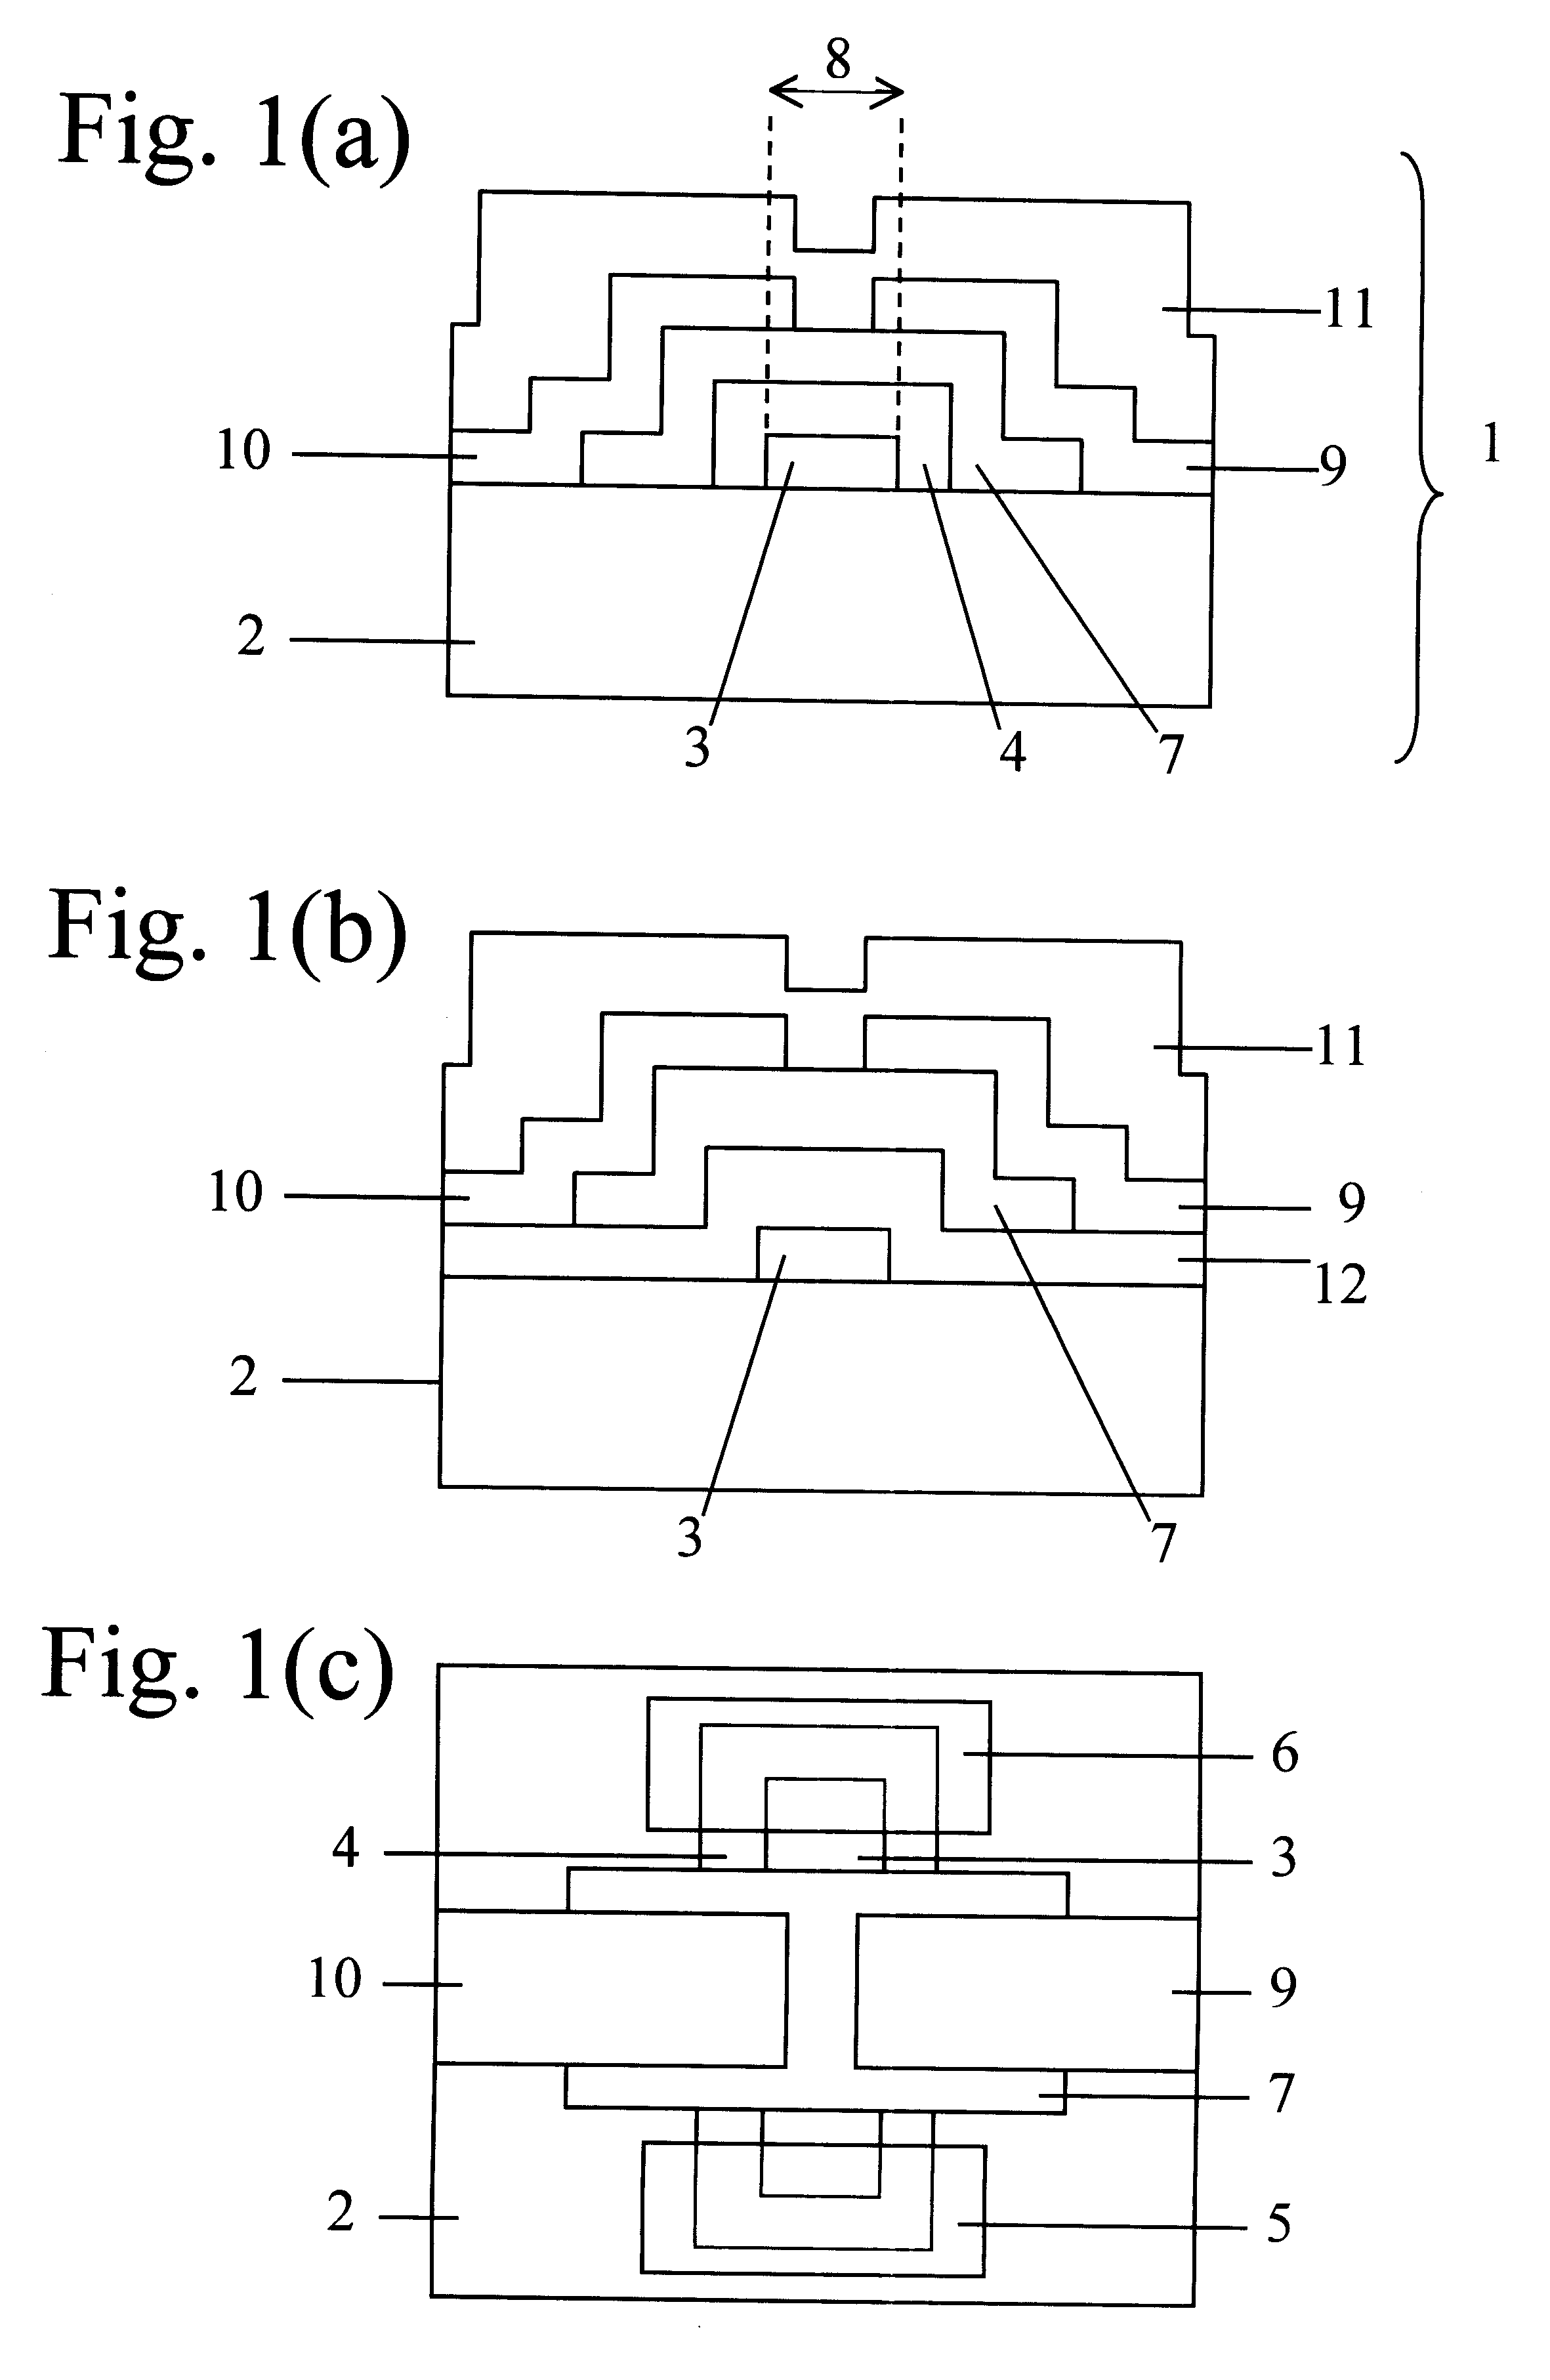 Methods to fabricate thin film transistors and circuits